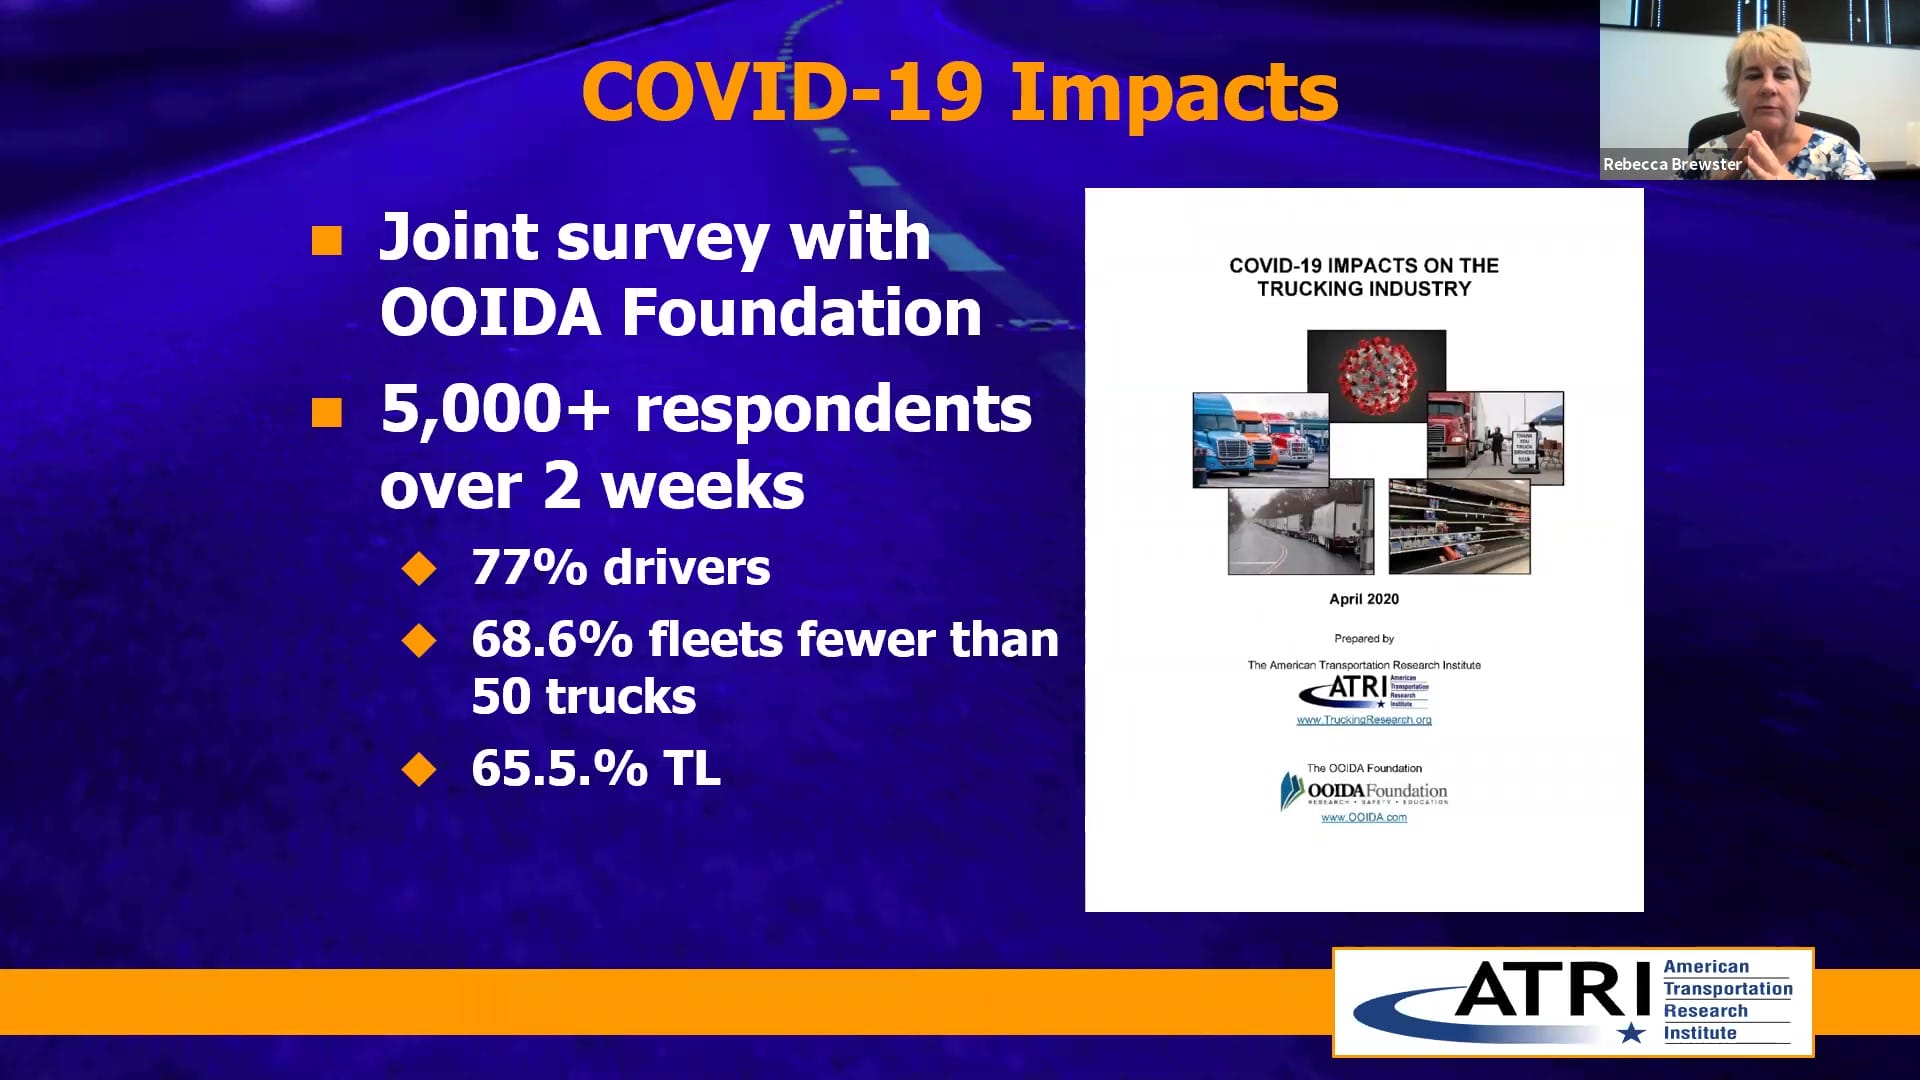 Trucking Industry Concerns 2020 from ATRI COVID-19 Impacts